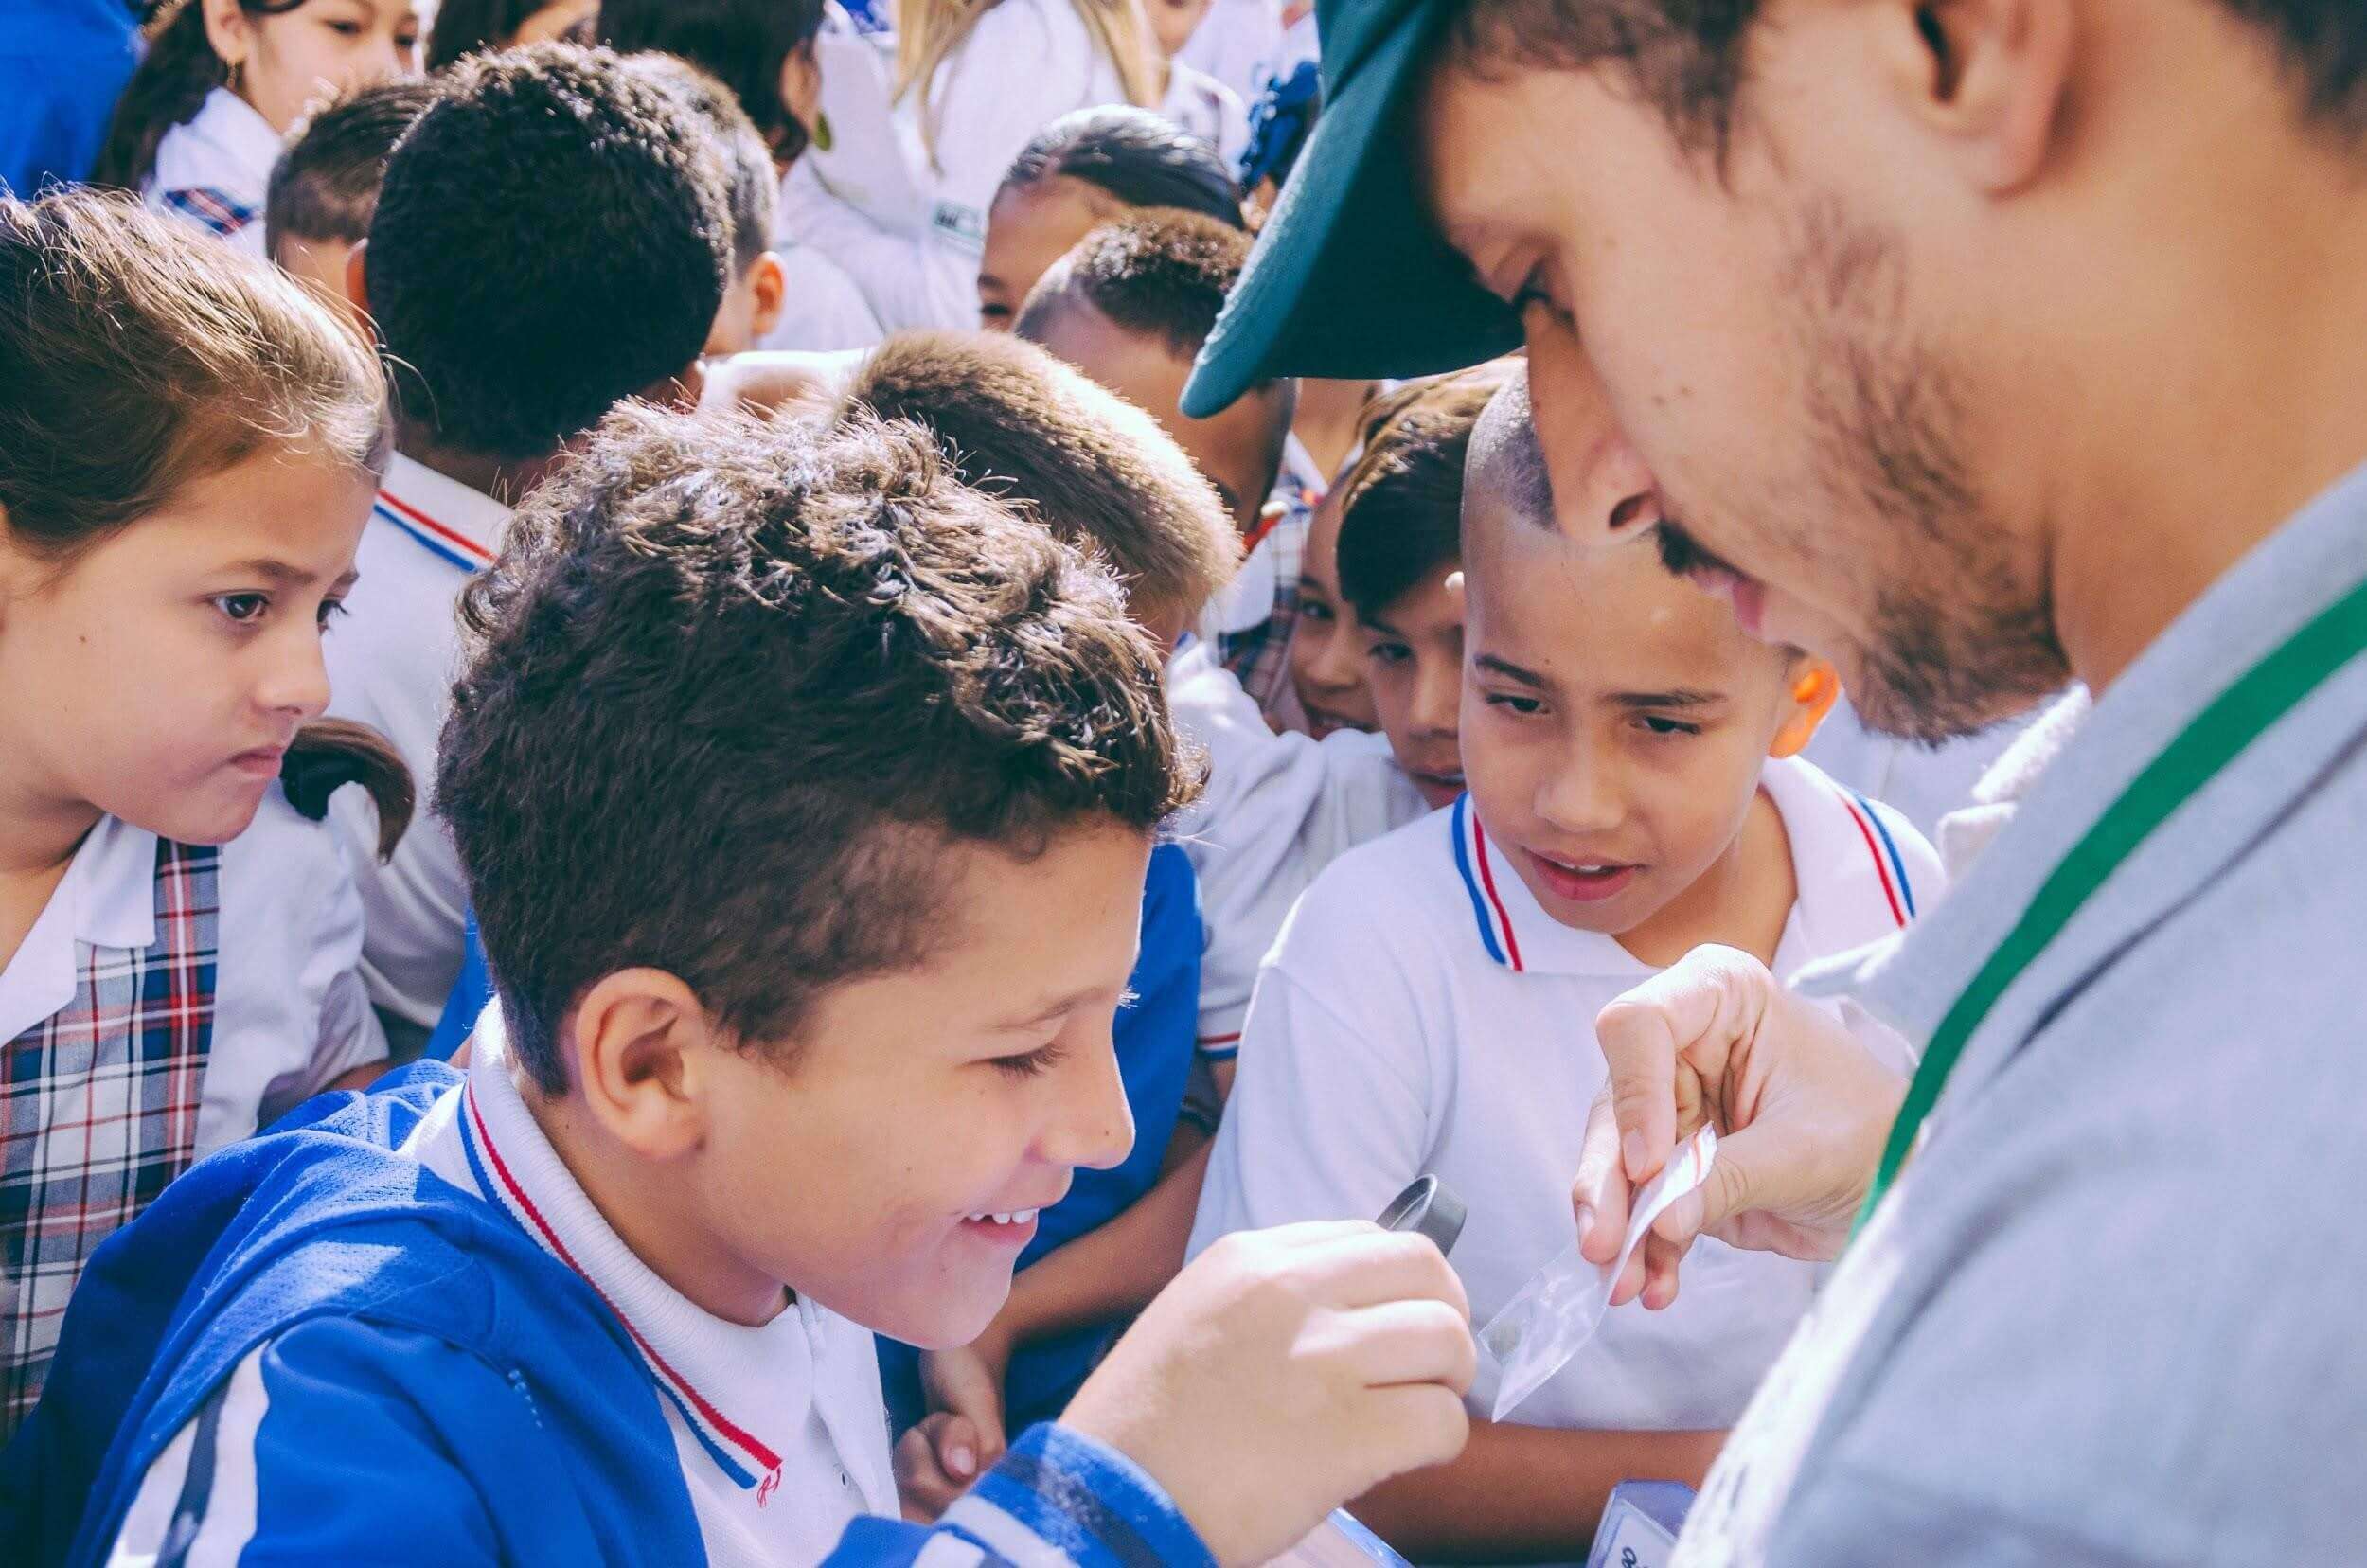 School students in Paris, Colombia participate in growing and releasing their own Wolbachia mosquitoes as part of a science project. Photo Credit: World Mosquito Program Colombia.